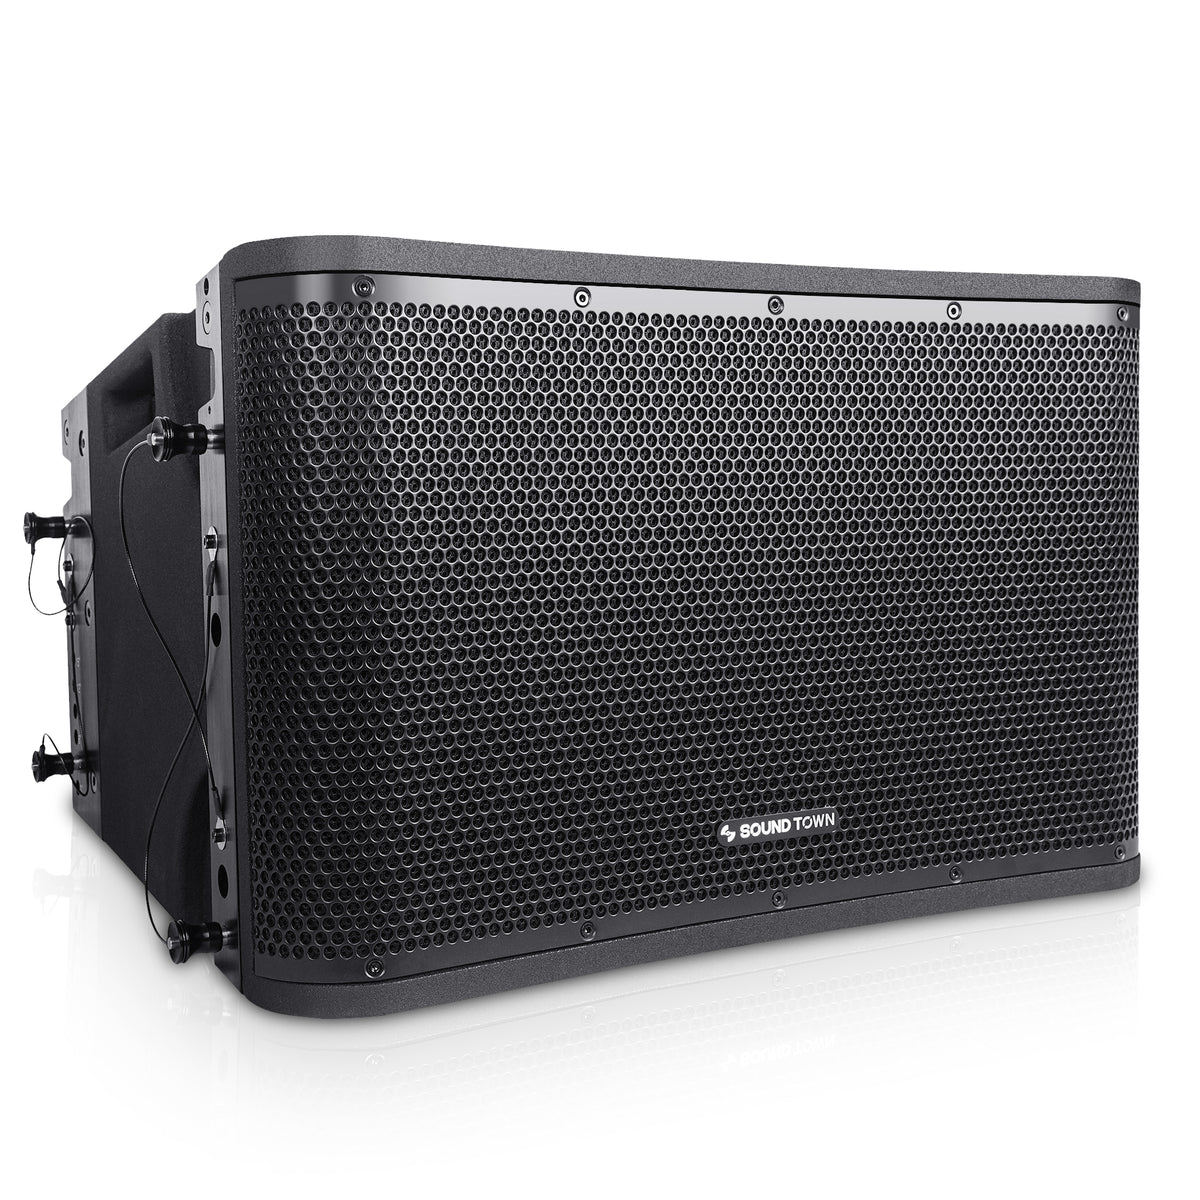 ZETHUS-112BPW | ZETHUS Series 12” Powered 2-Way Line Array Loudspeaker  System w/ Two Titanium Compression Drivers, Onboard DSP, for Live Sound,  Black